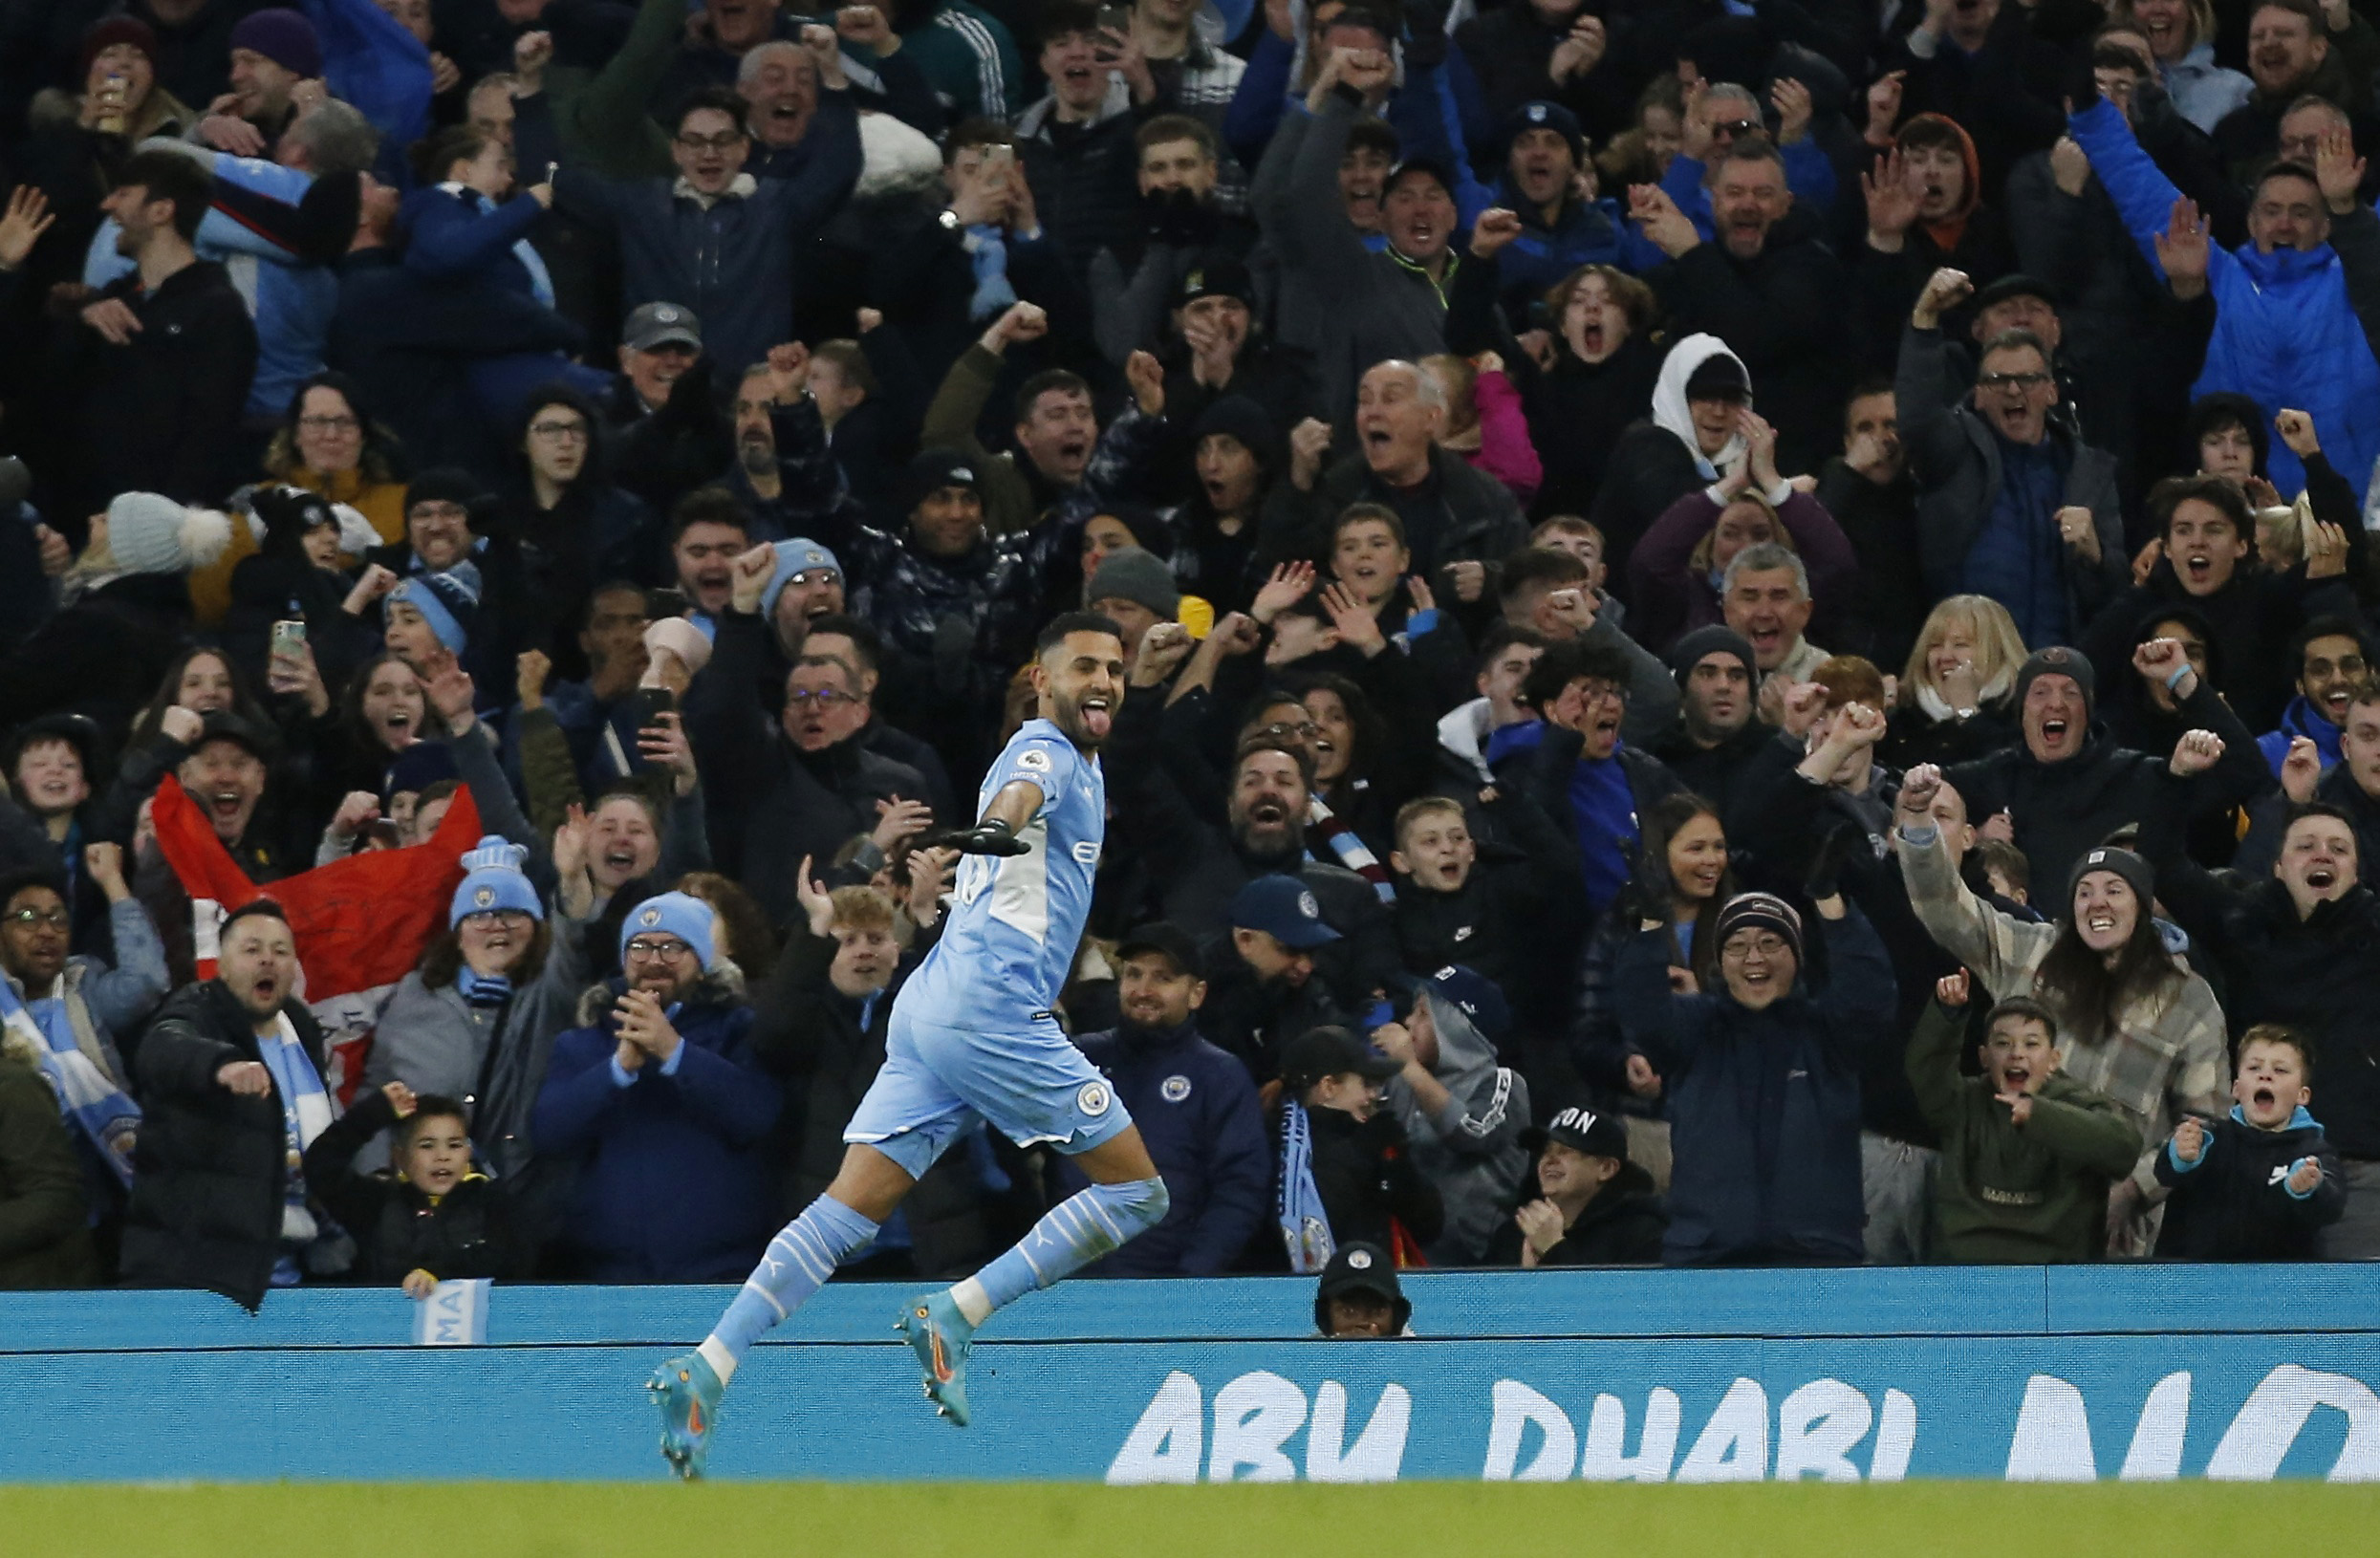 Manchester City 4-1 Manchester United: Man United's fightback washed away by dominant Man City who extend their lead to six points as 'Manchester is Blue'